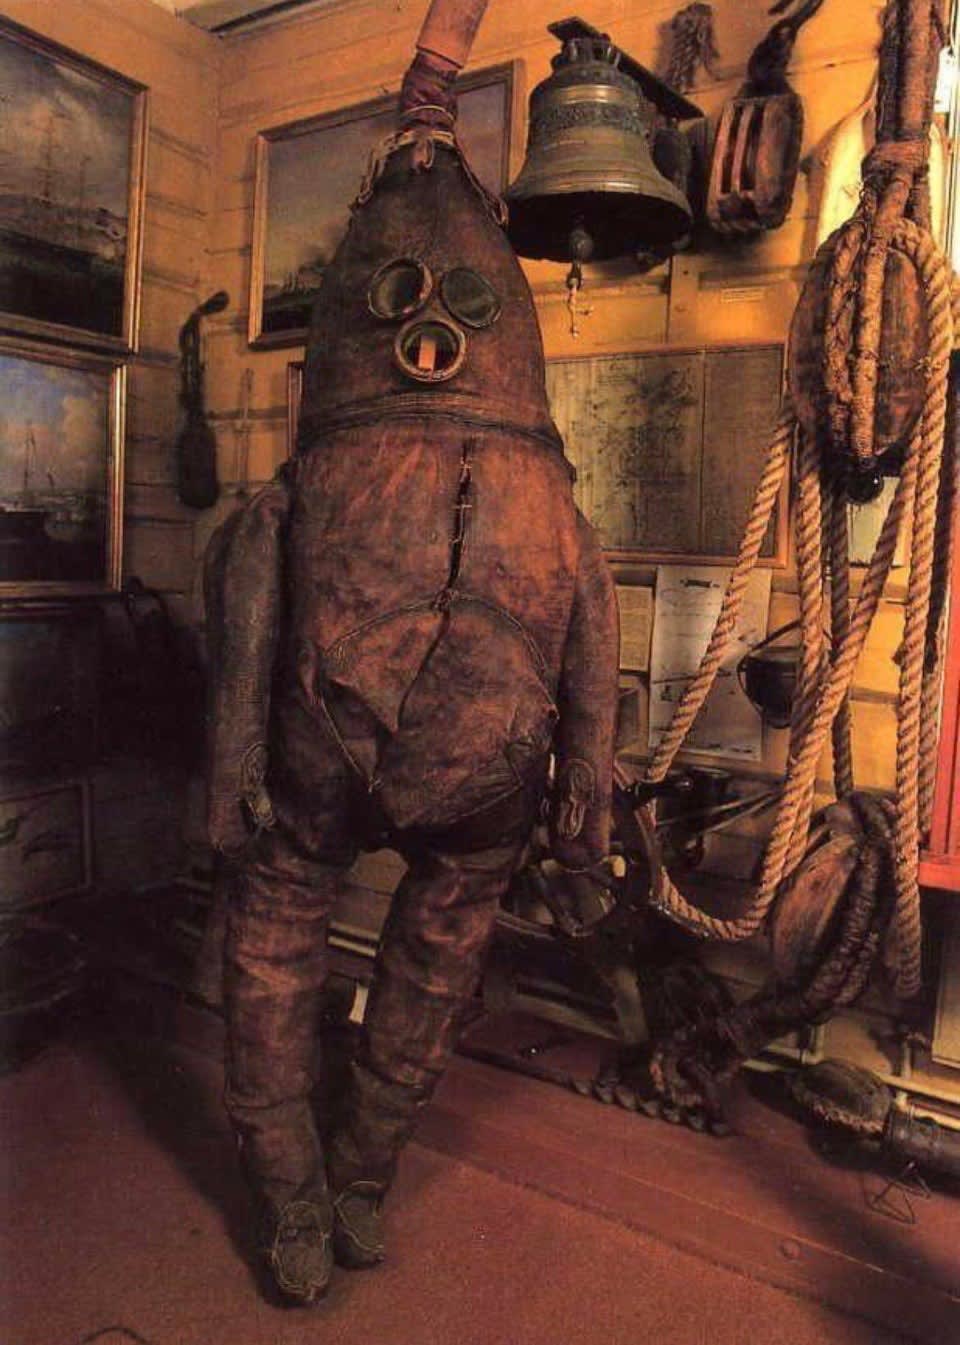 This is the oldest diving suit (1860)